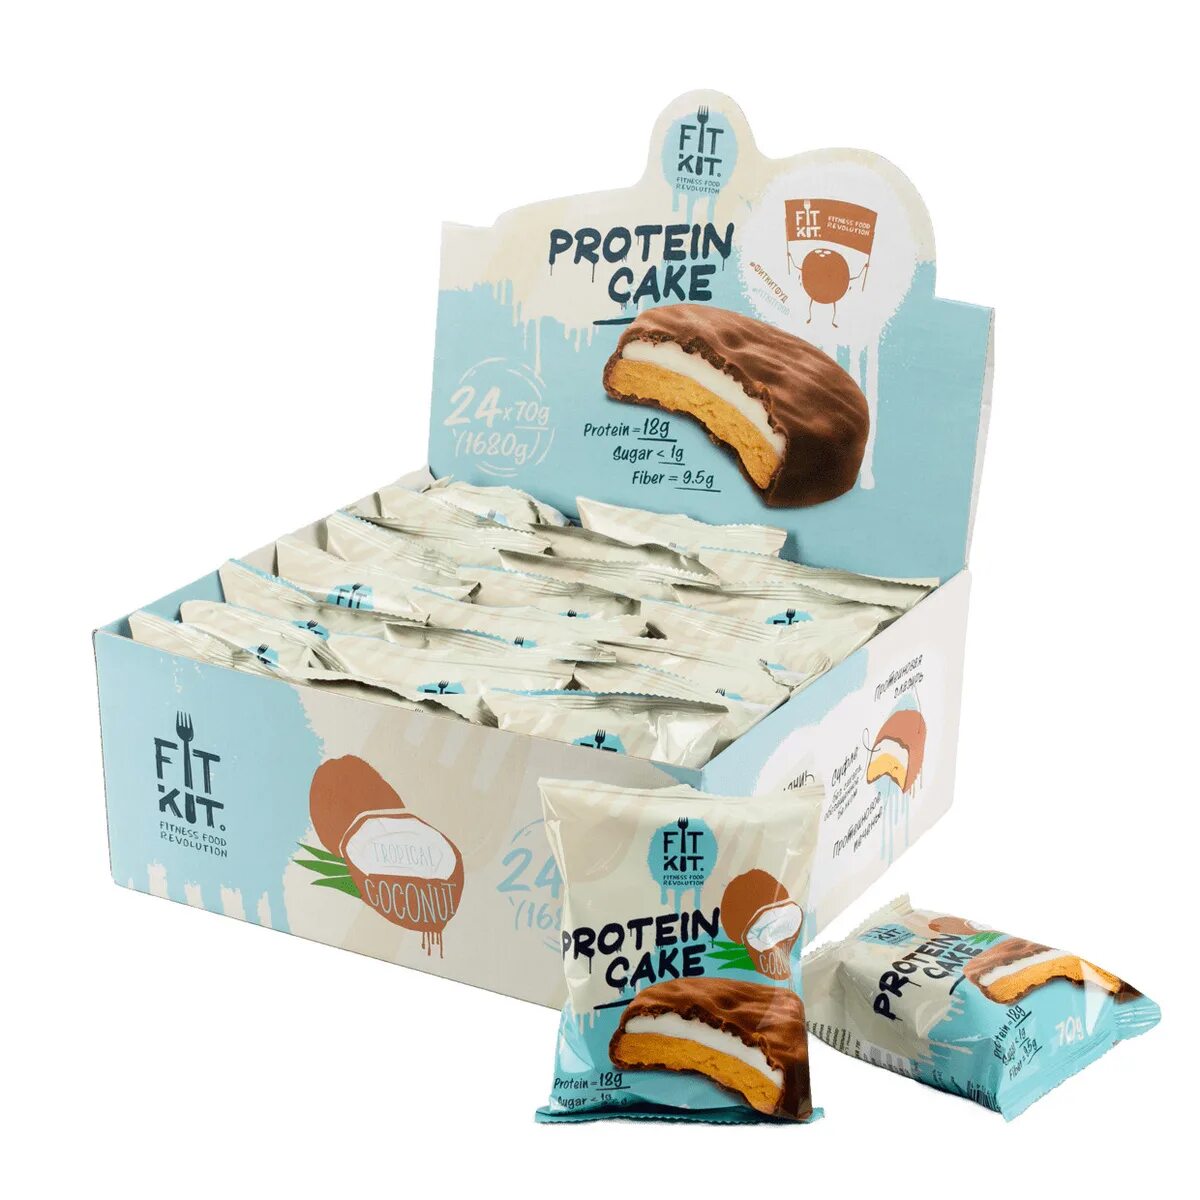 Fitkit. Fit Kit Protein Cake 70g. Fit Kit, Protein Cake Extra 70 г.. Fit Kit Extra Protein Cake 70г (Кокос). Протеиновое печенье Protein Cake Fit Kit (70 г) (Peanut paste).